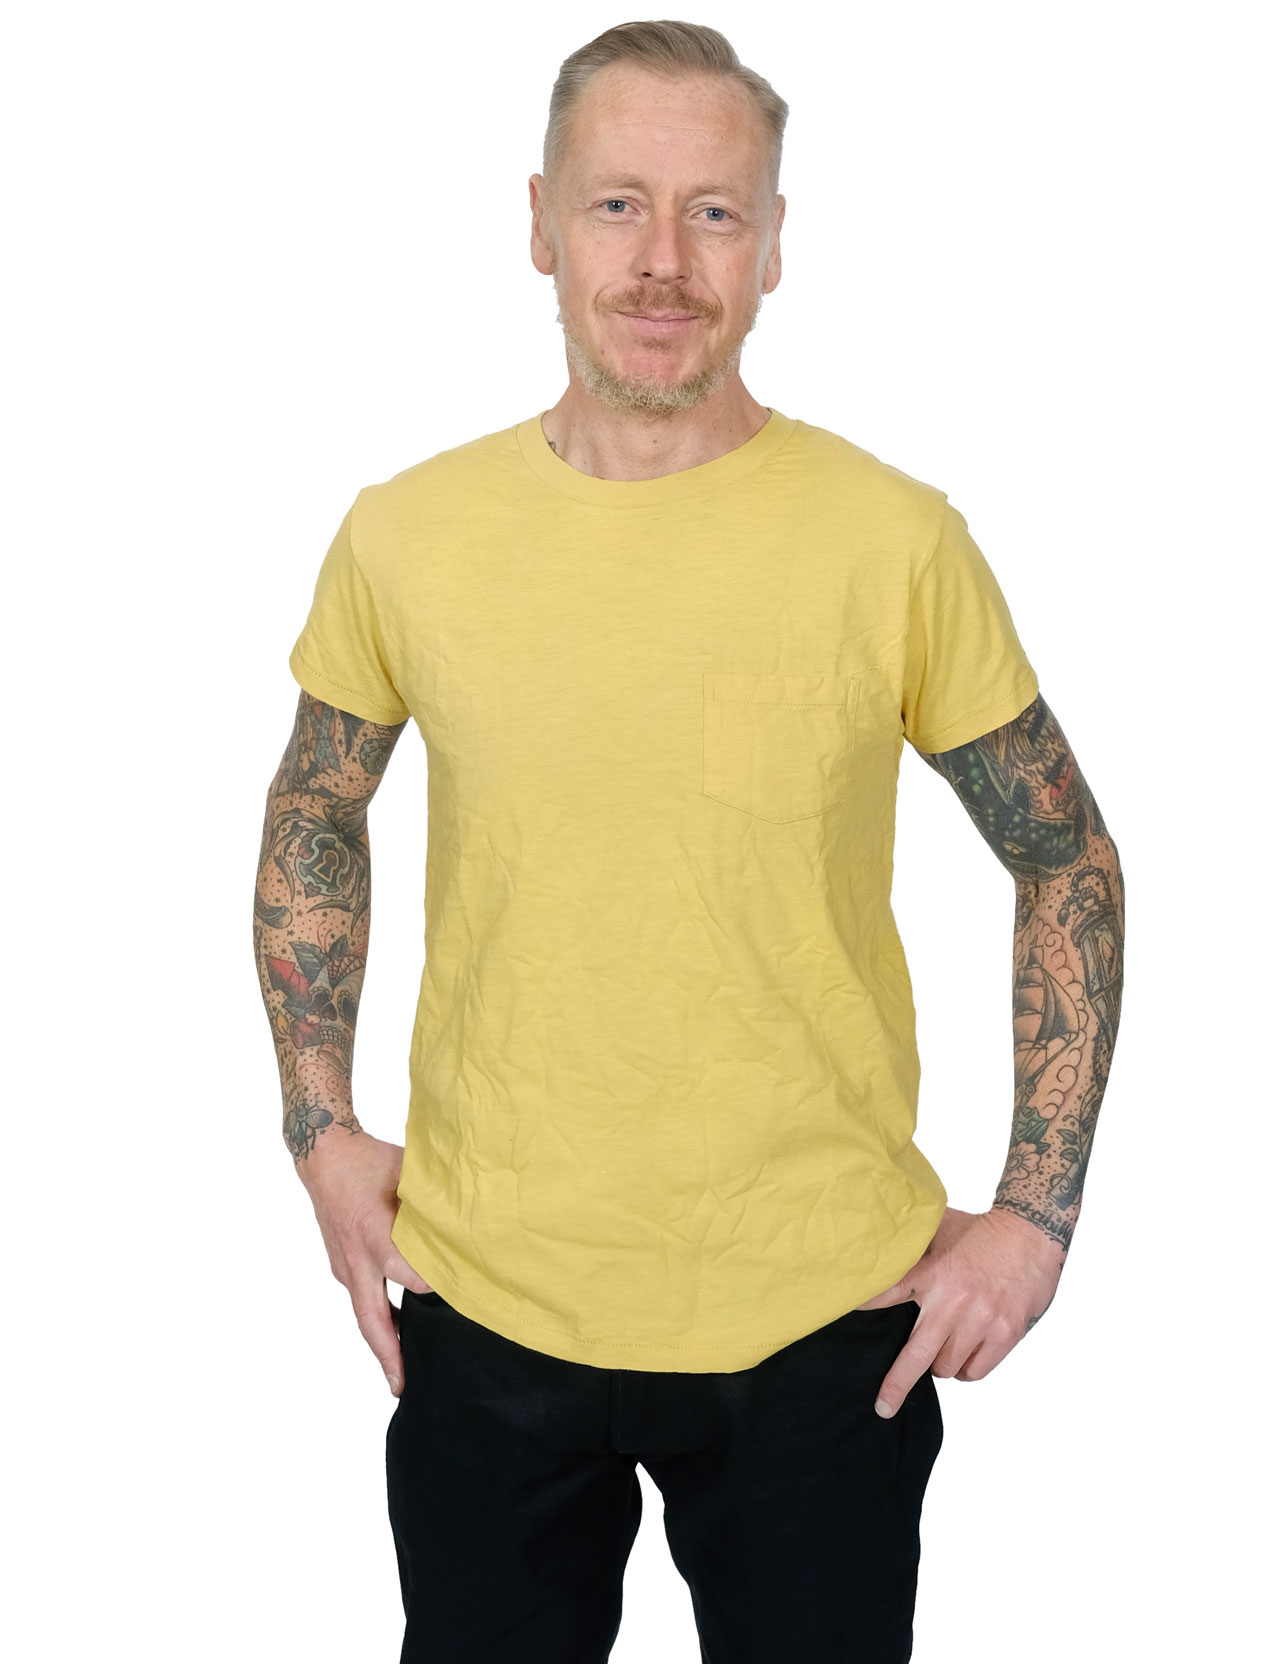 Levis-Vintage-Clothing---1950s-Sportswear-Tee---Misted-Yellow-12